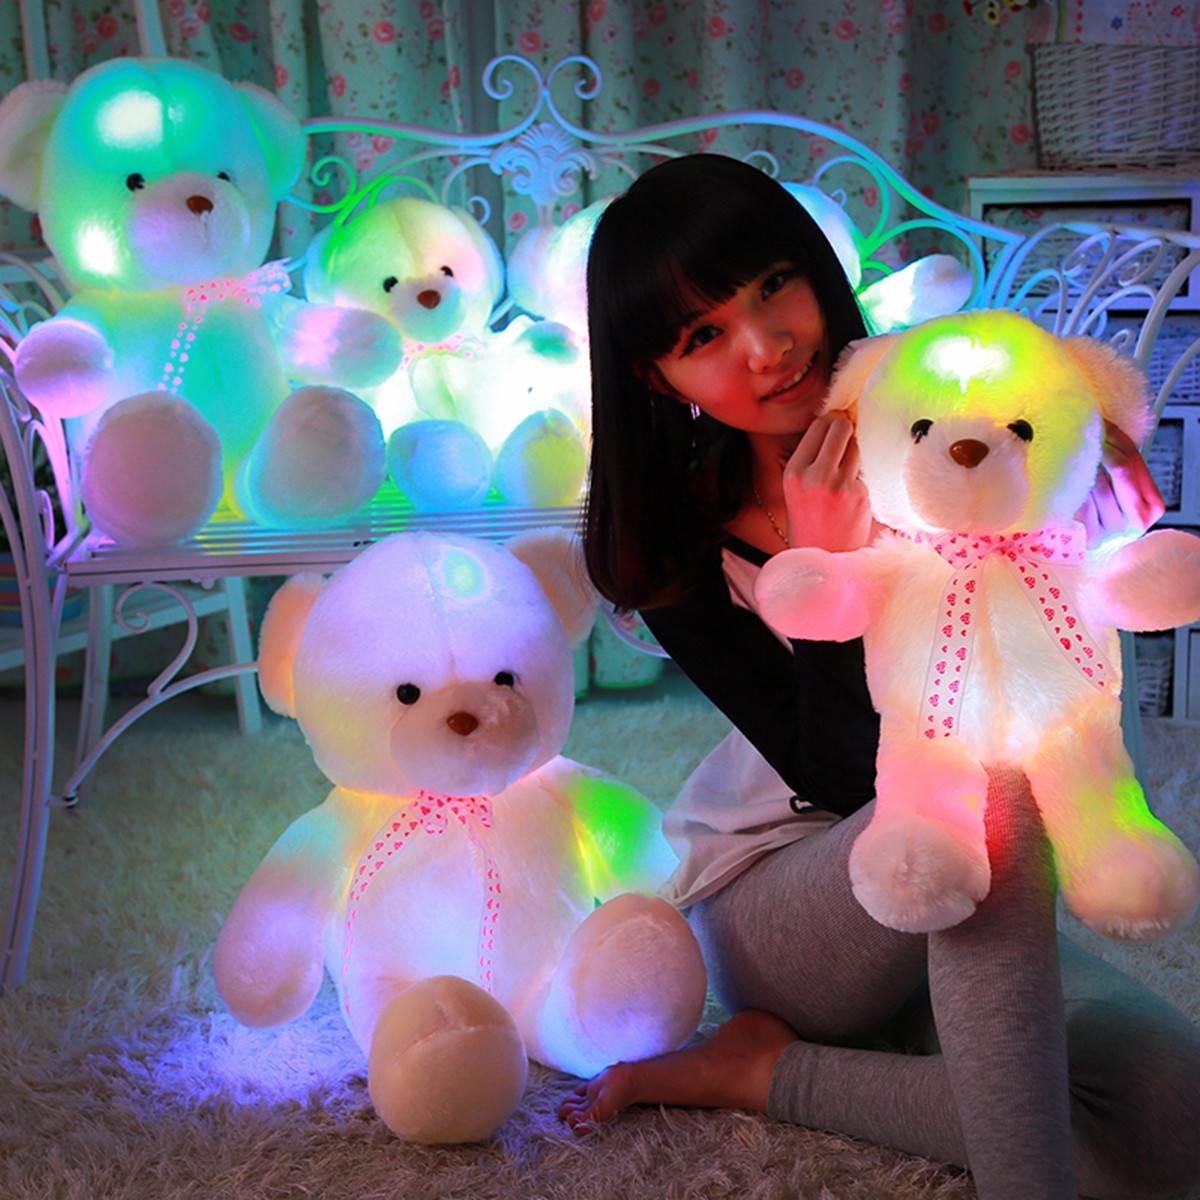 50CM Colorful Creative Glow LED Light Plush Bear Cushion Stuffed Doll Throw Pillow Toy For Friends Family Gift